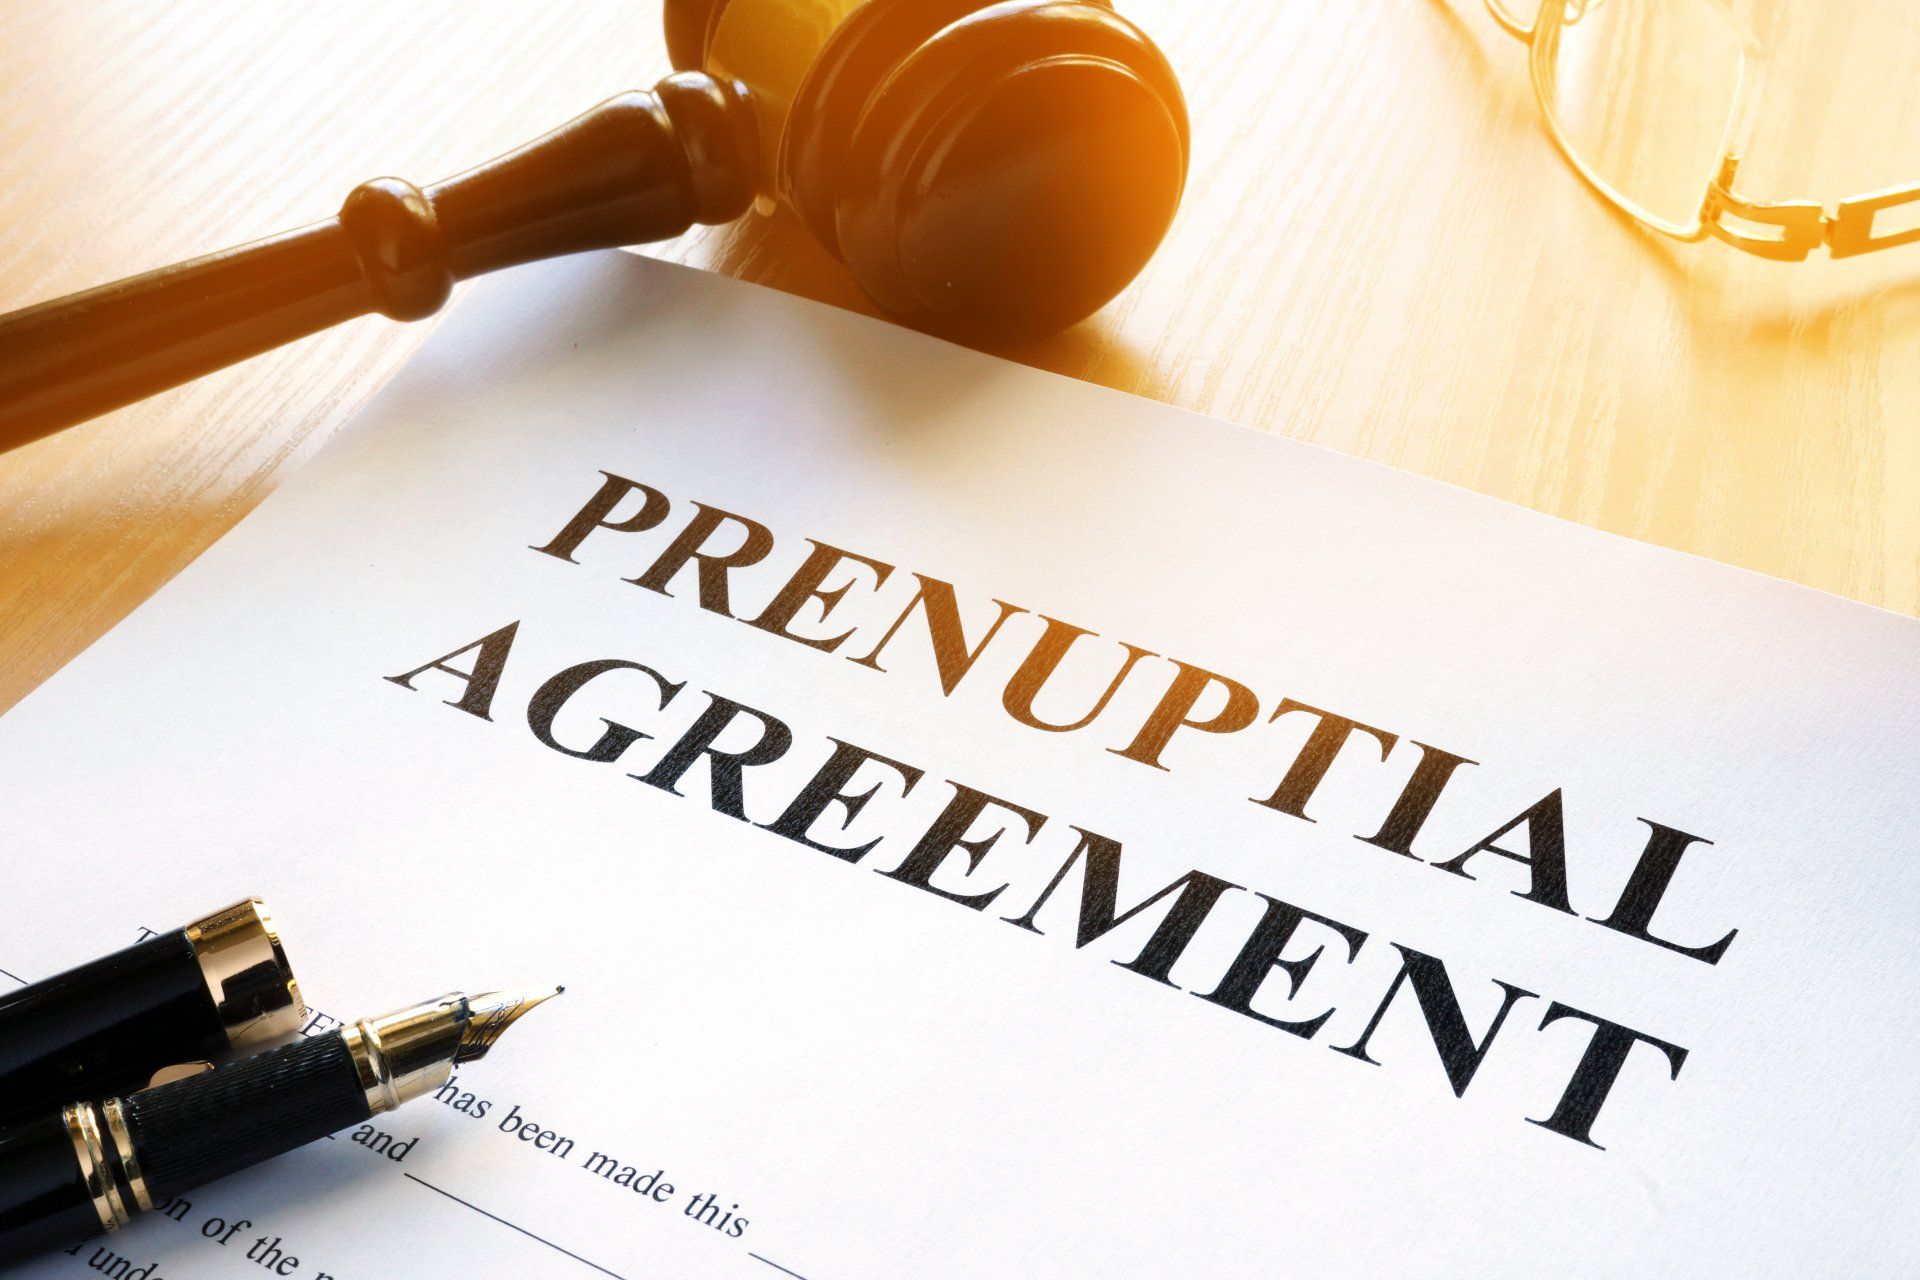 A legal document by Ferro & Battey about Prenuptial Agreements